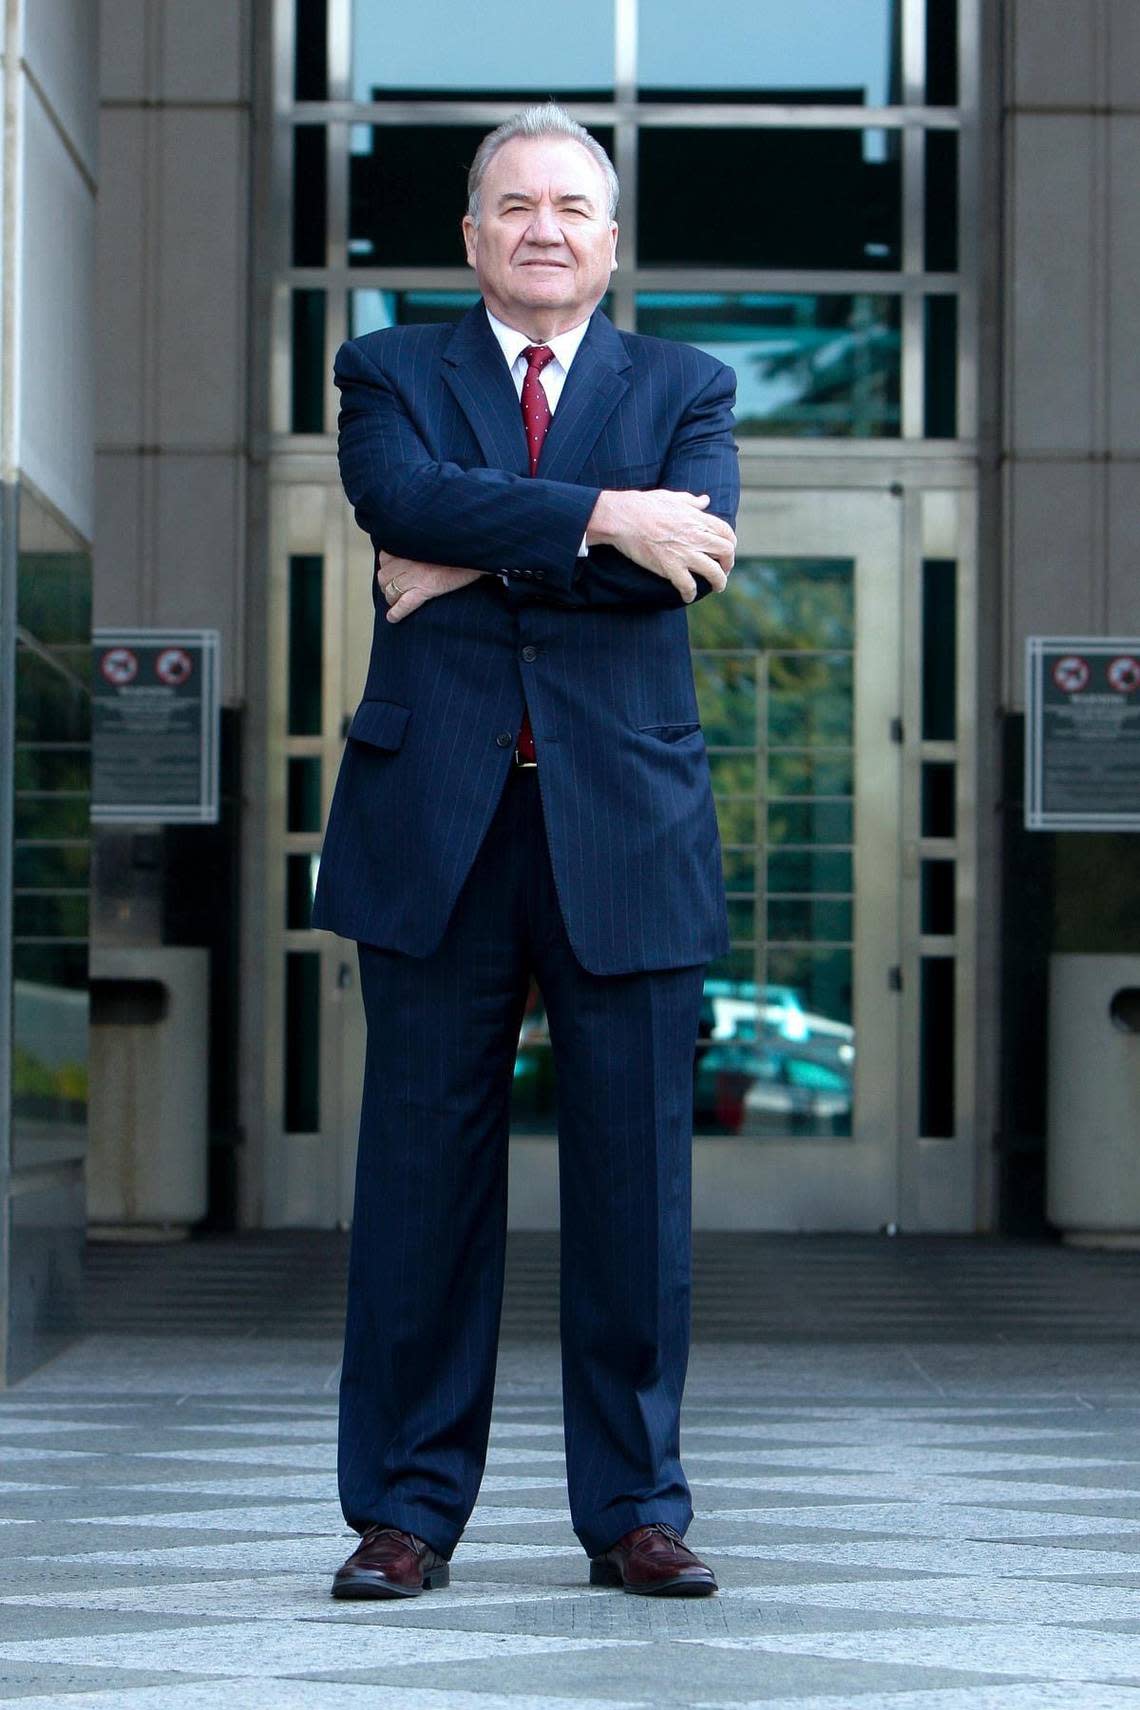 Attorney Donald Heller stands at the entrance to the Robert T. Matsui U.S. Courthouse in downtown Sacramento, where he fought for many clients as a defense attorney.